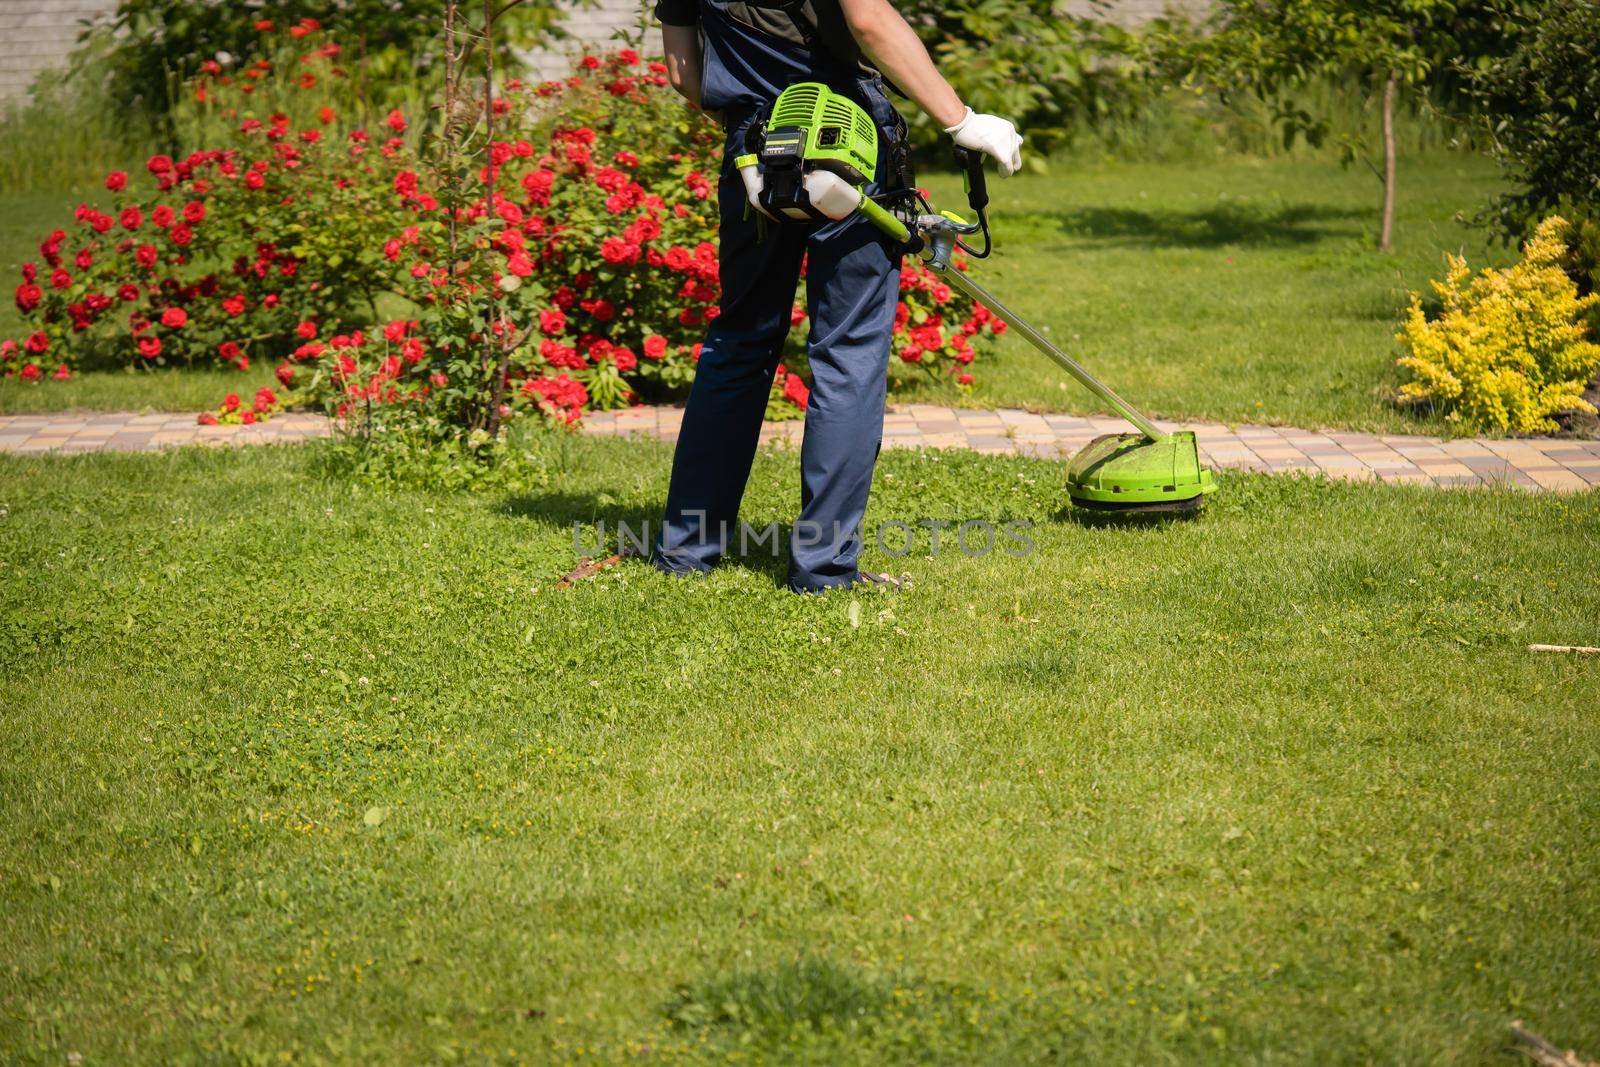 A young man is mowing a lawn with a lawn mower in his beautiful green floral summer garden. A professional gardener is cutting the grass in gloves.